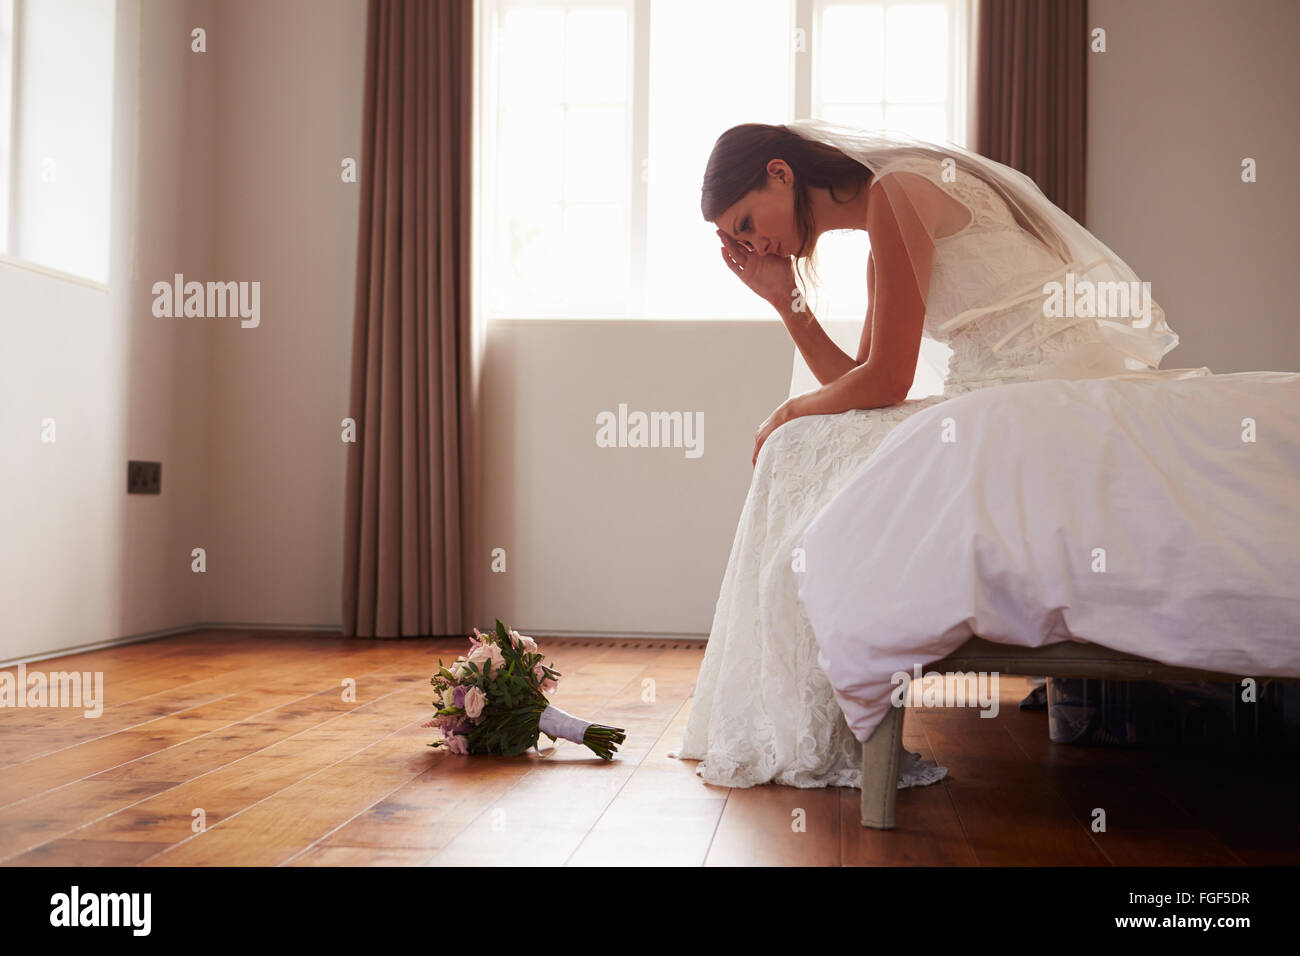 Bride In Bedroom Having Second Thoughts Before Wedding Stock Photo